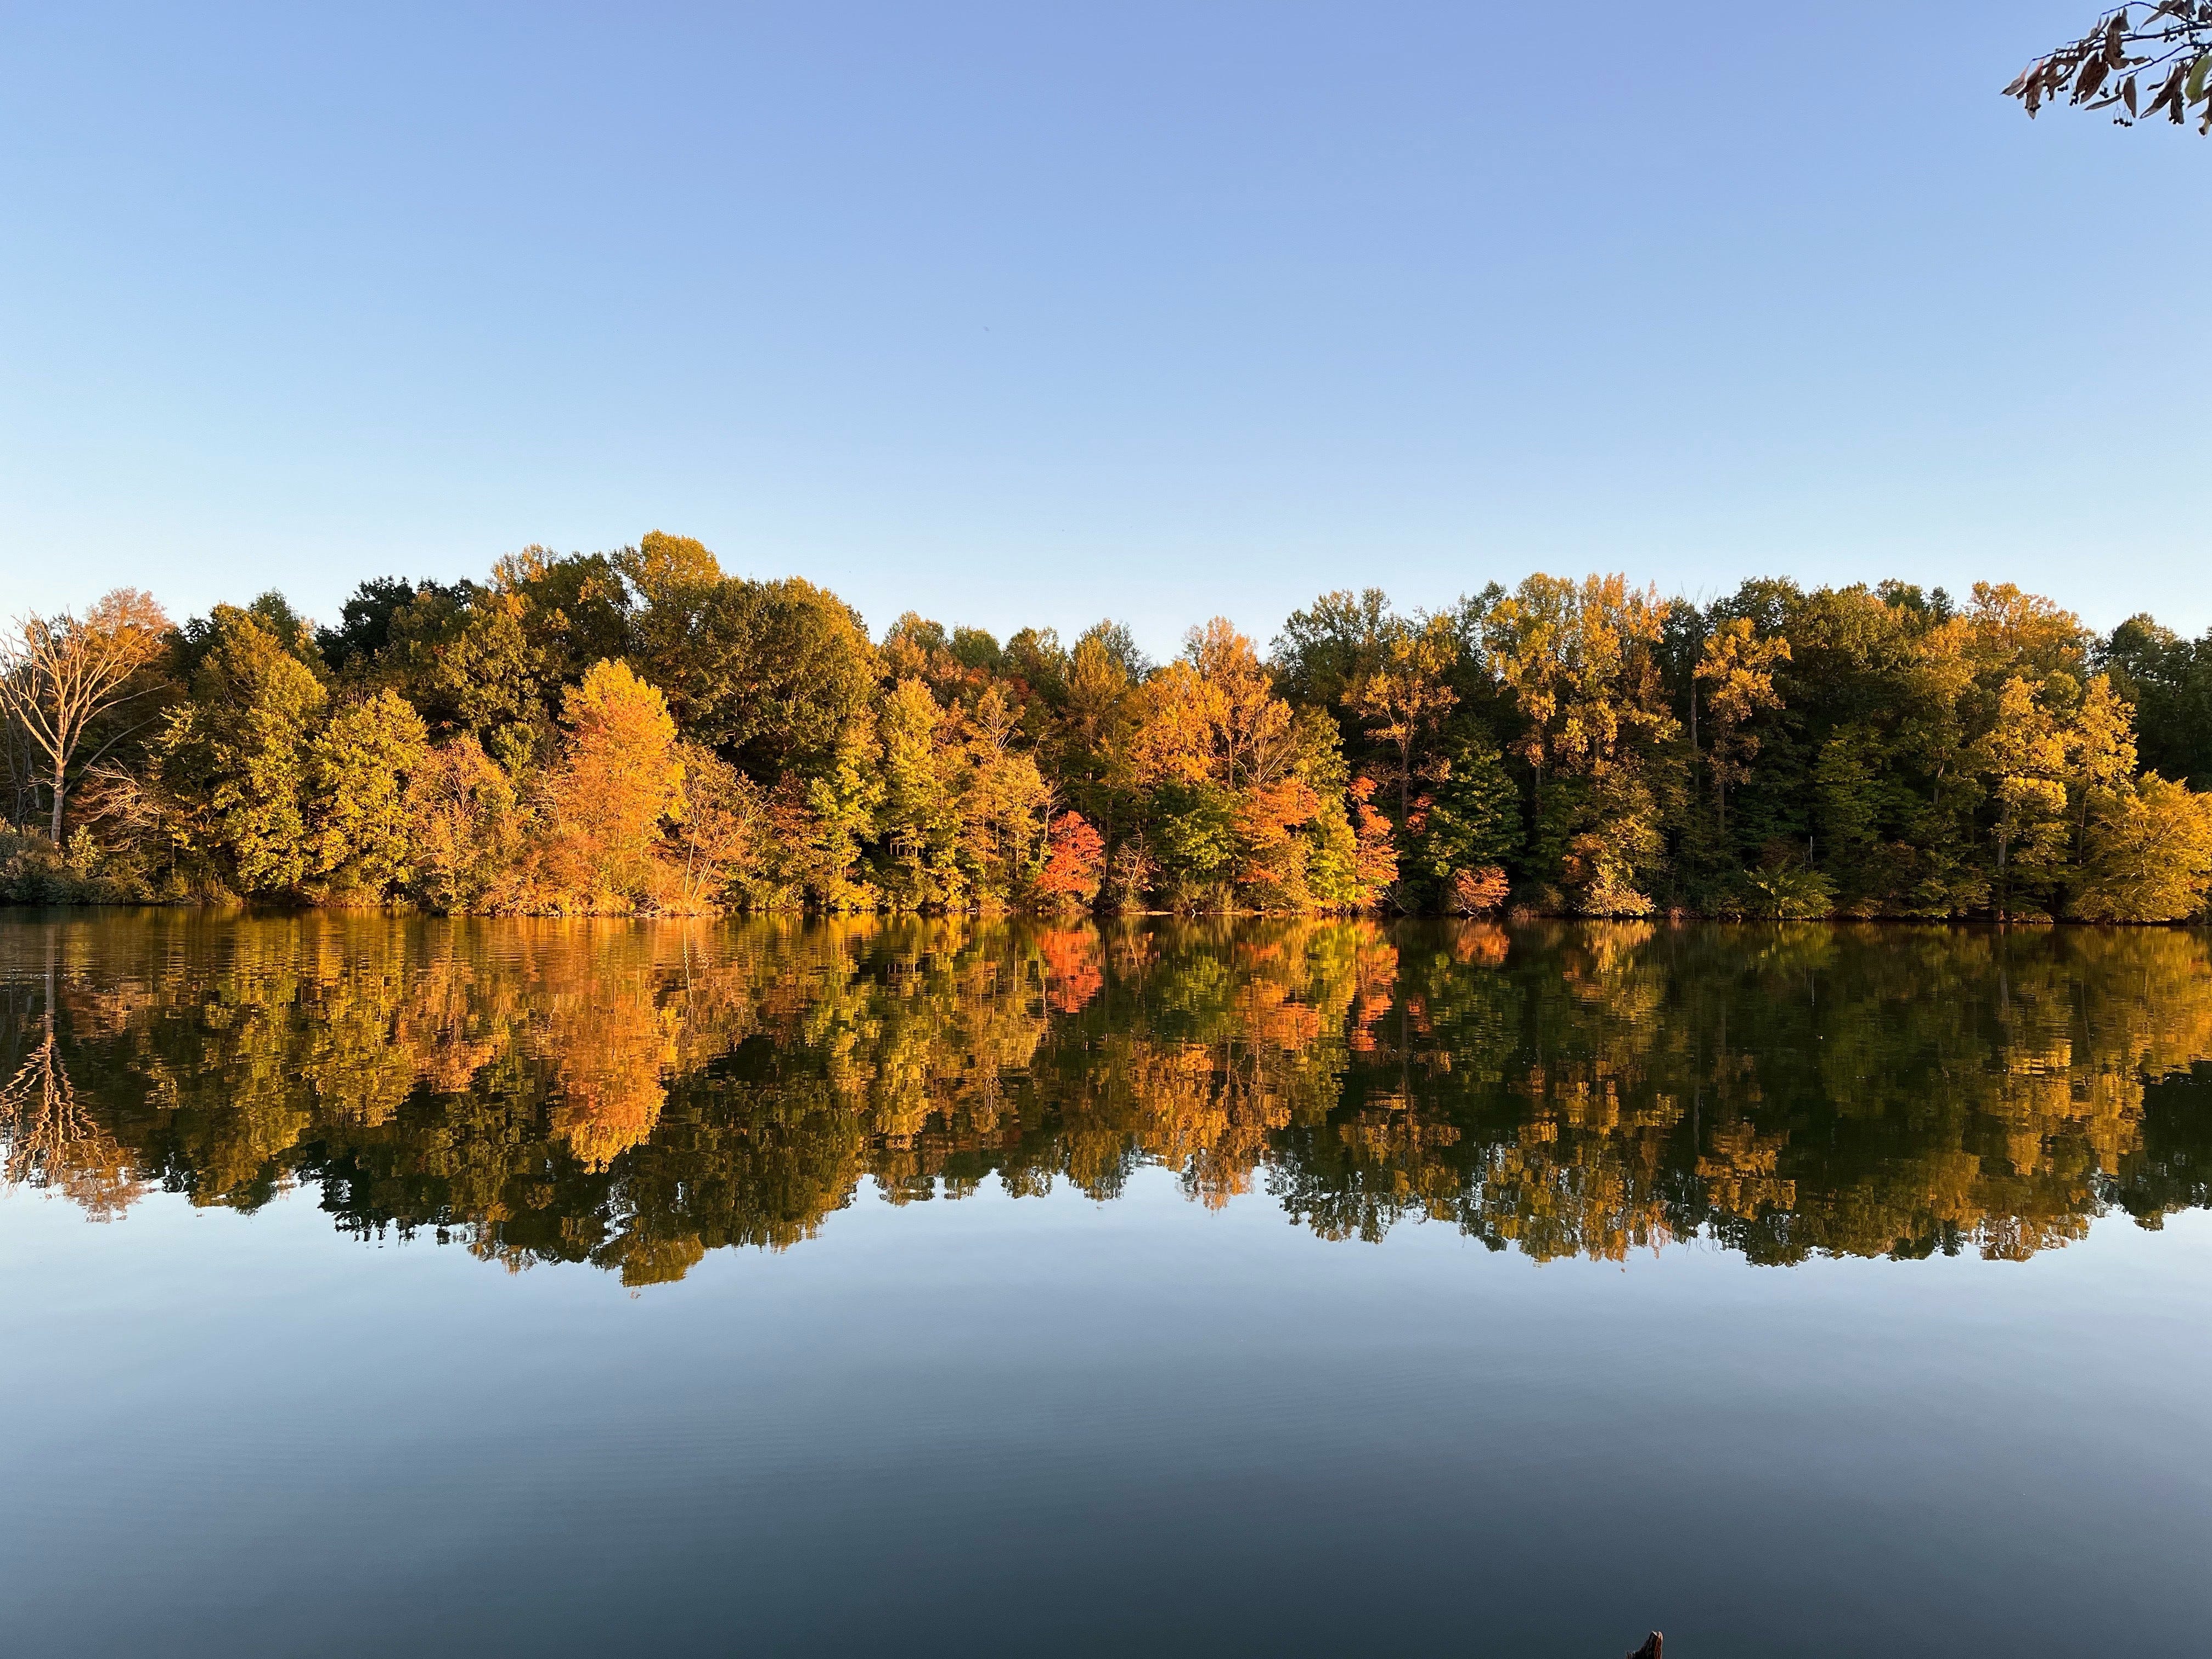 Fall colors 2021: Here's what fall leaves look like across Indiana